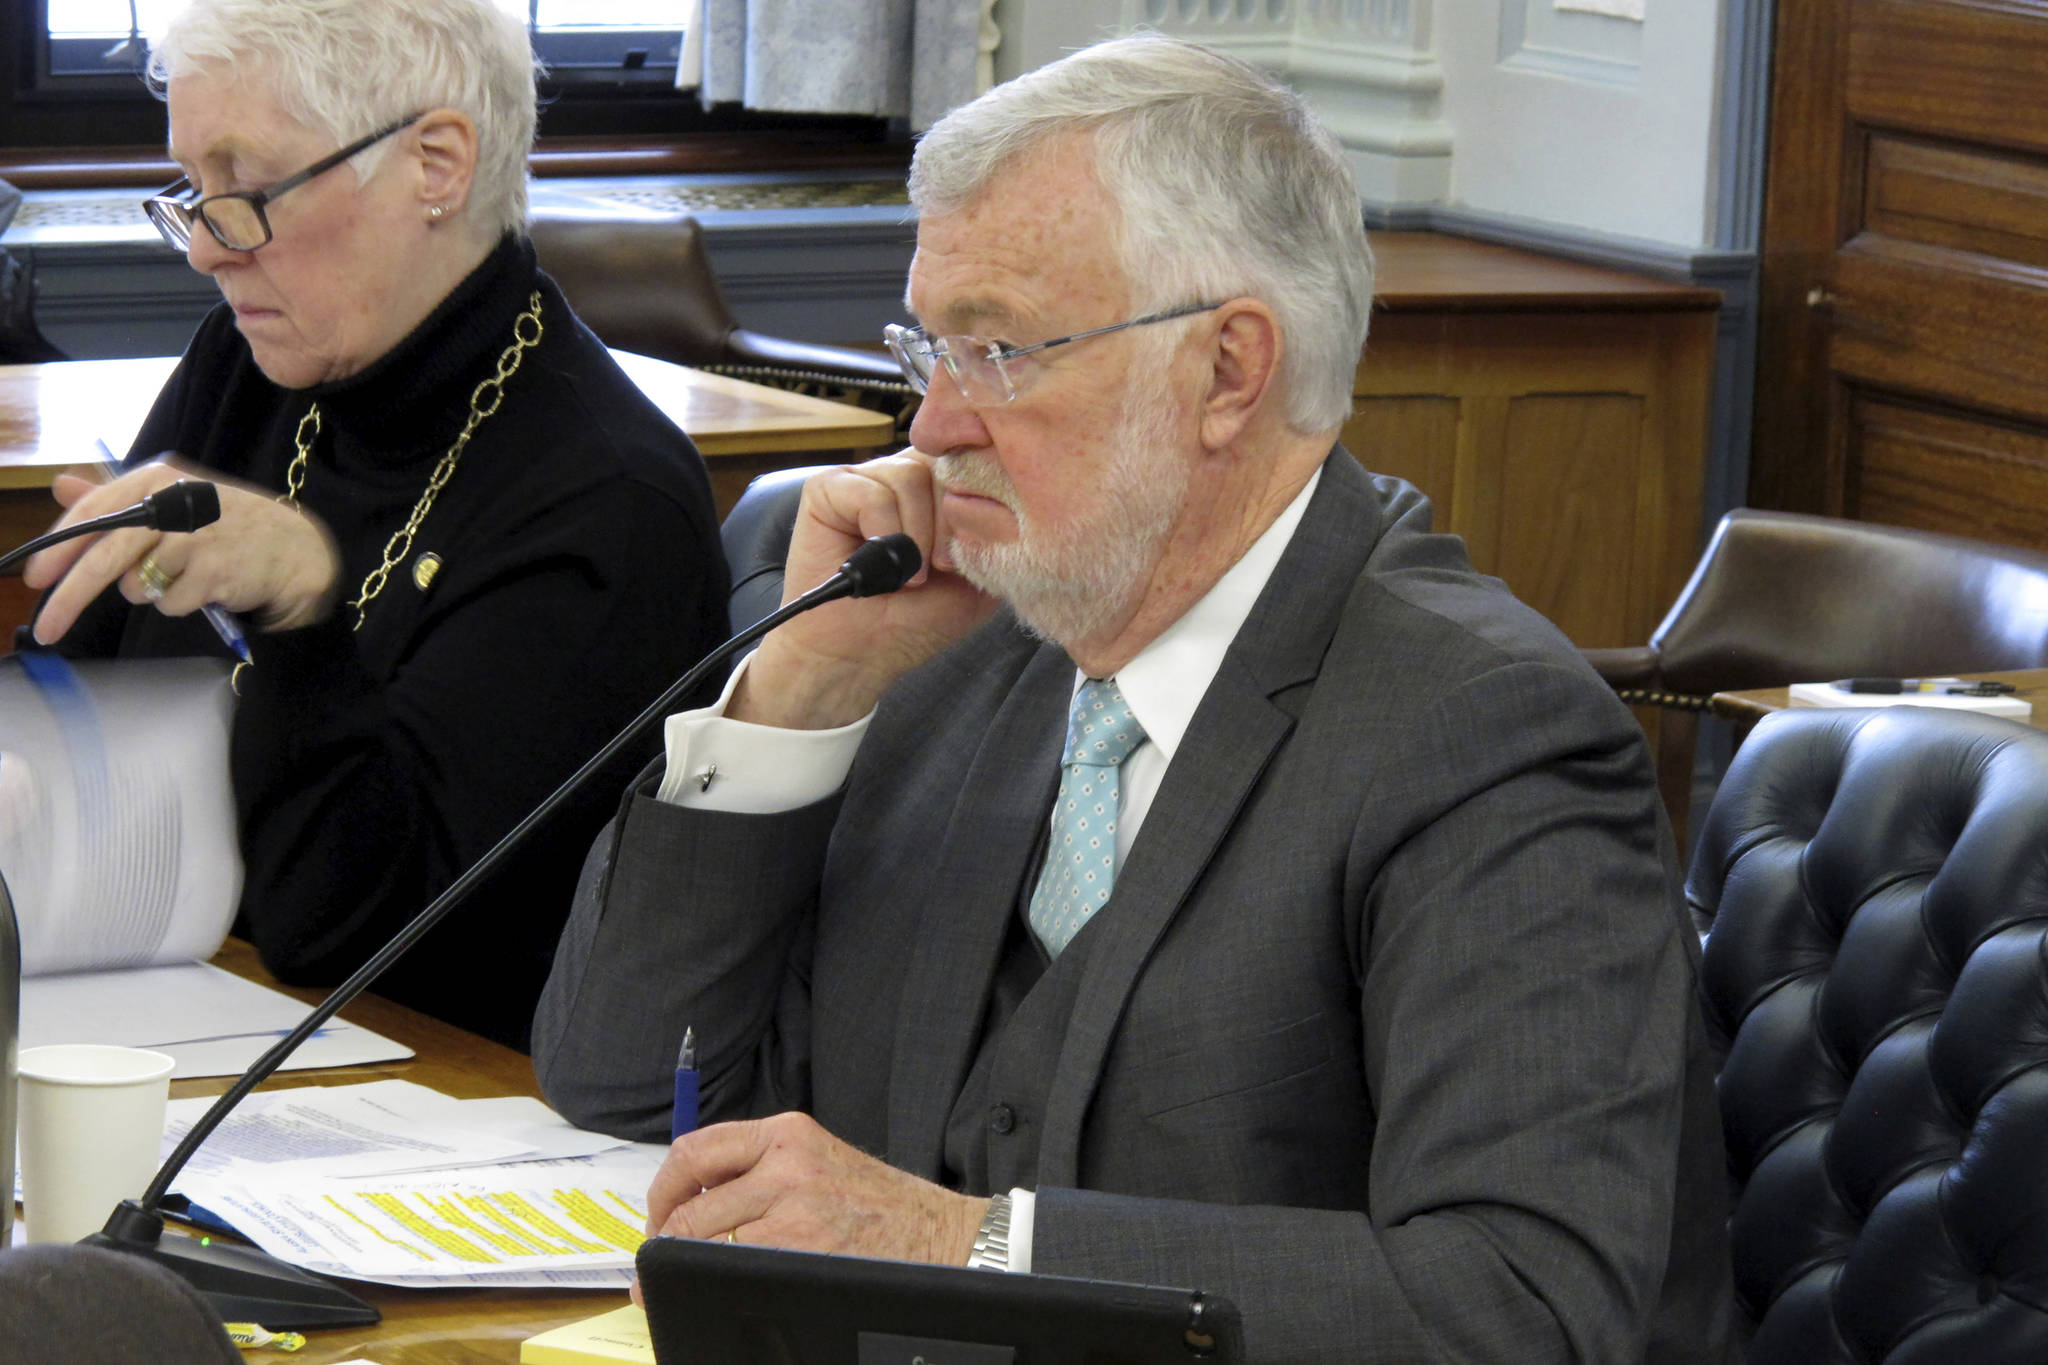 Alaska state Sen. Gary Stevens, right, listens during a Legislative Council meeting on Tuesday, March 10, 2020, in Juneau, Alaska. Stevens on Tuesday announced a subcommittee of lawmakers will work on contingency planning for the Legislature surrounding the new coronavirus. (AP Photo/Becky Bohrer)